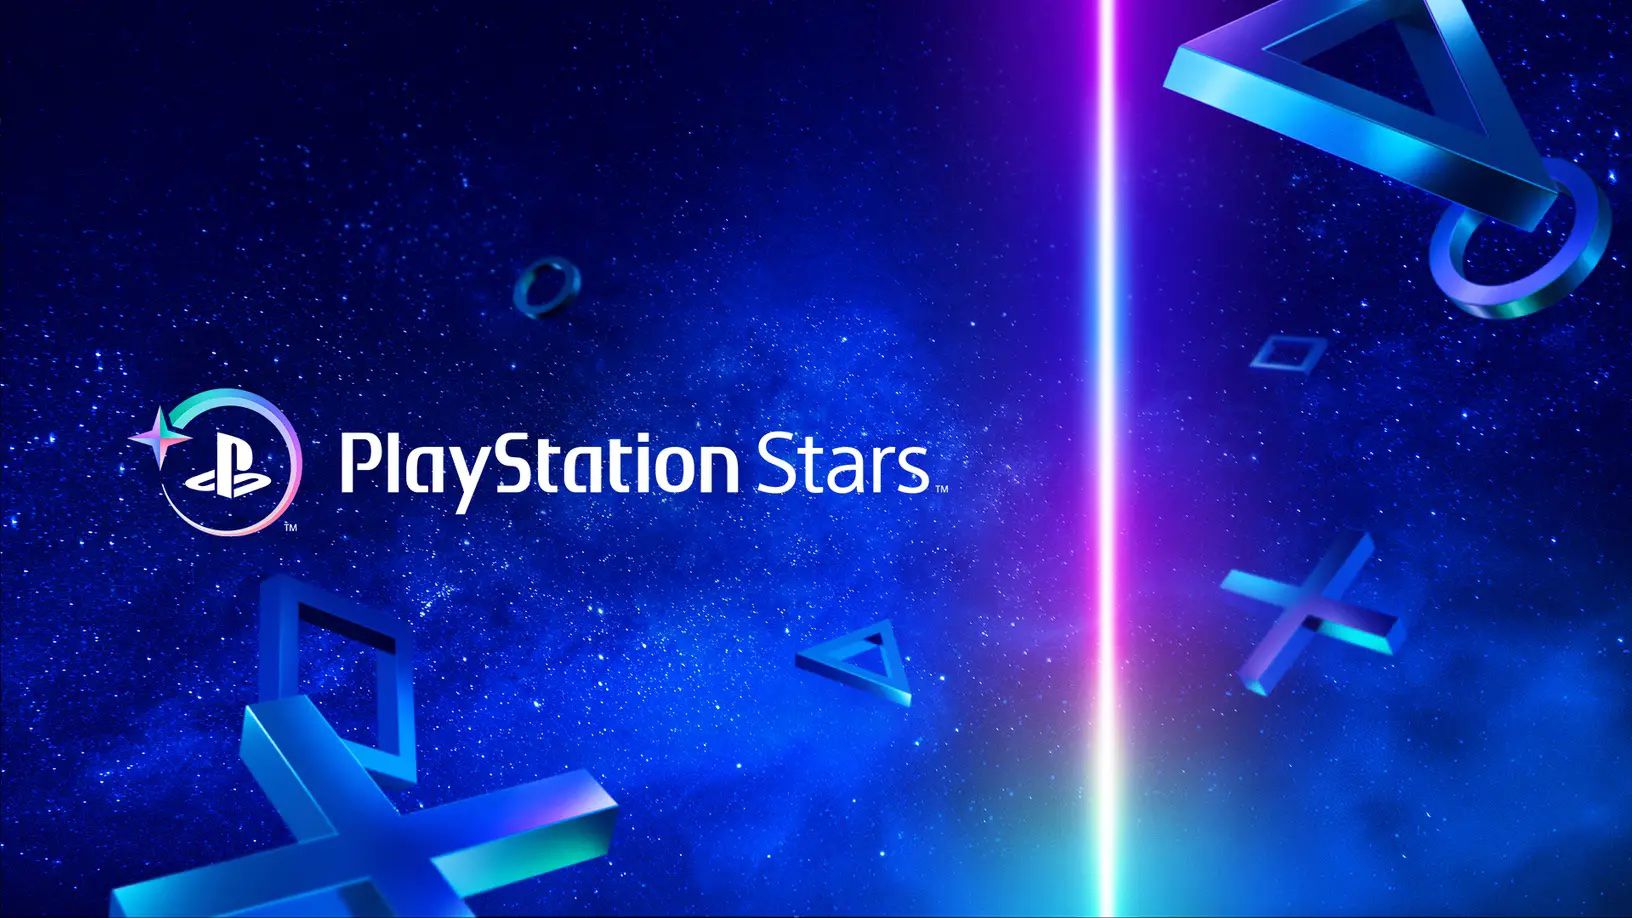 Polygon on "PlayStation Stars: Everything you need to know about Sony's new rewards program https://t.co/p58ONvBEf6 https://t.co/pzHrAlgDW0" / Twitter